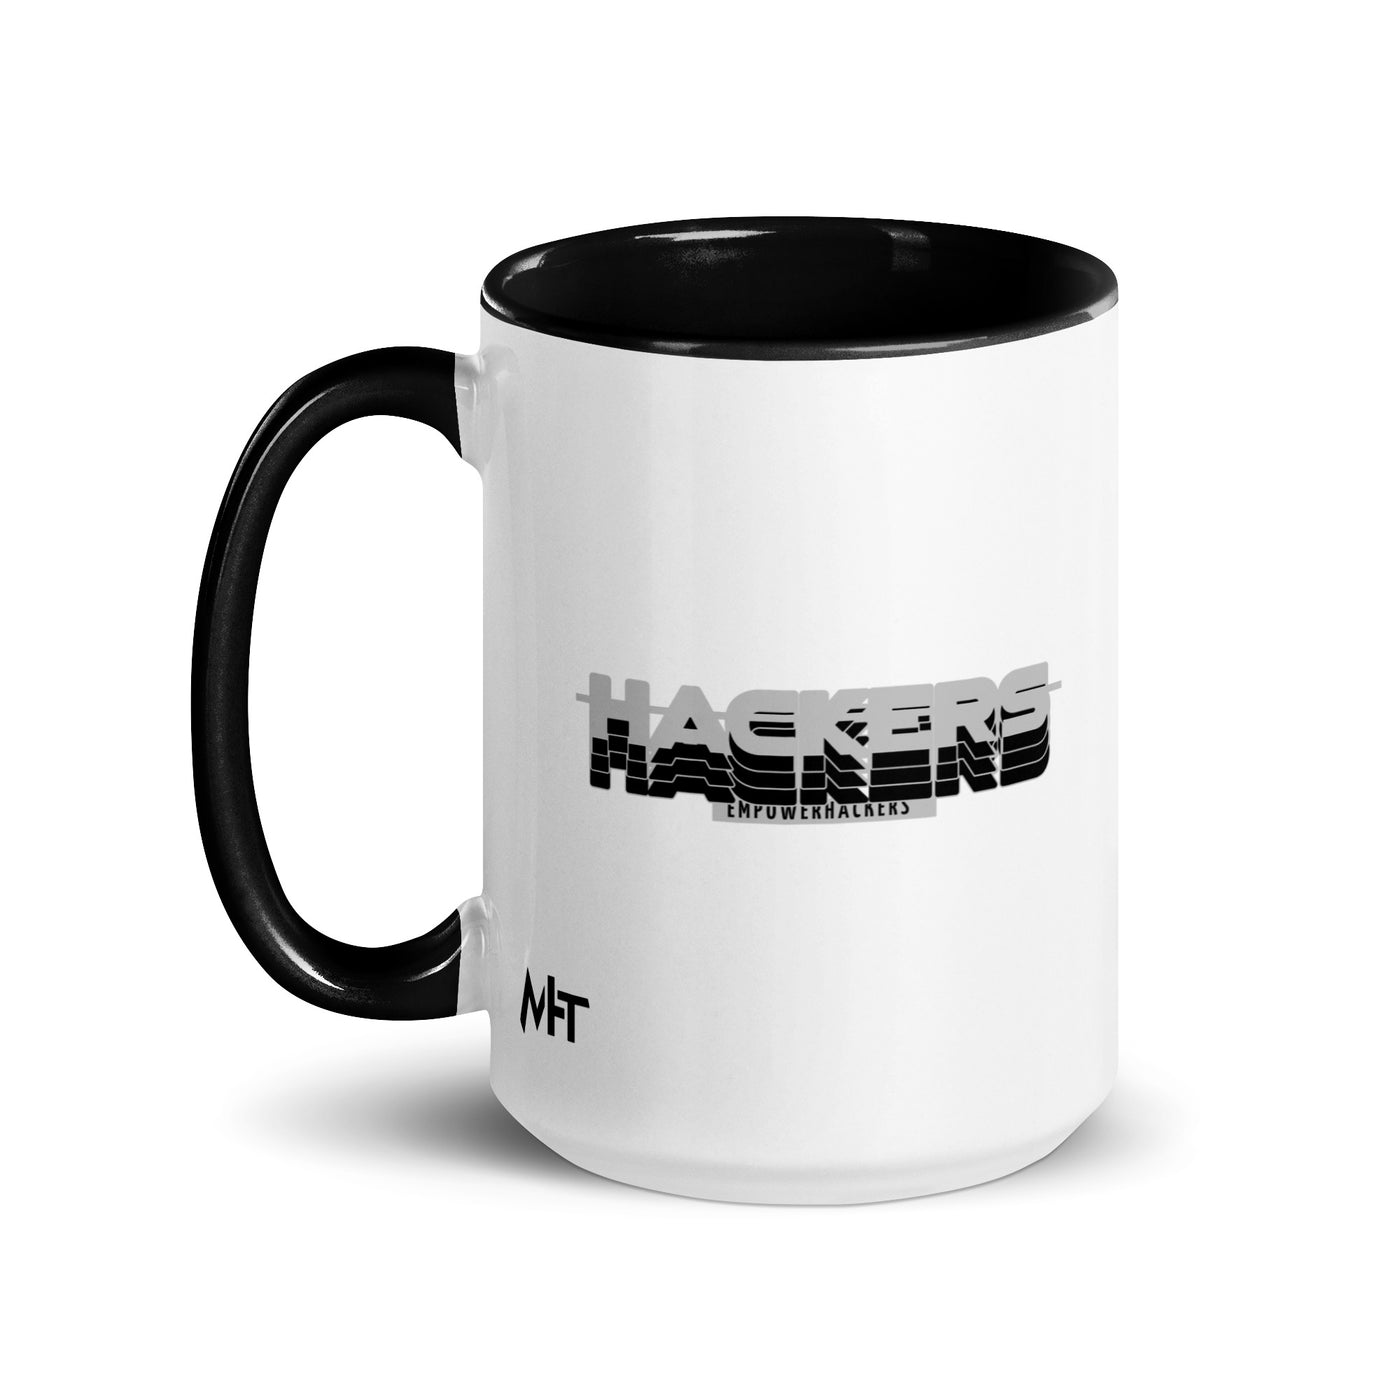 Hackers Empower Hackers V3 - Mug with Color Inside